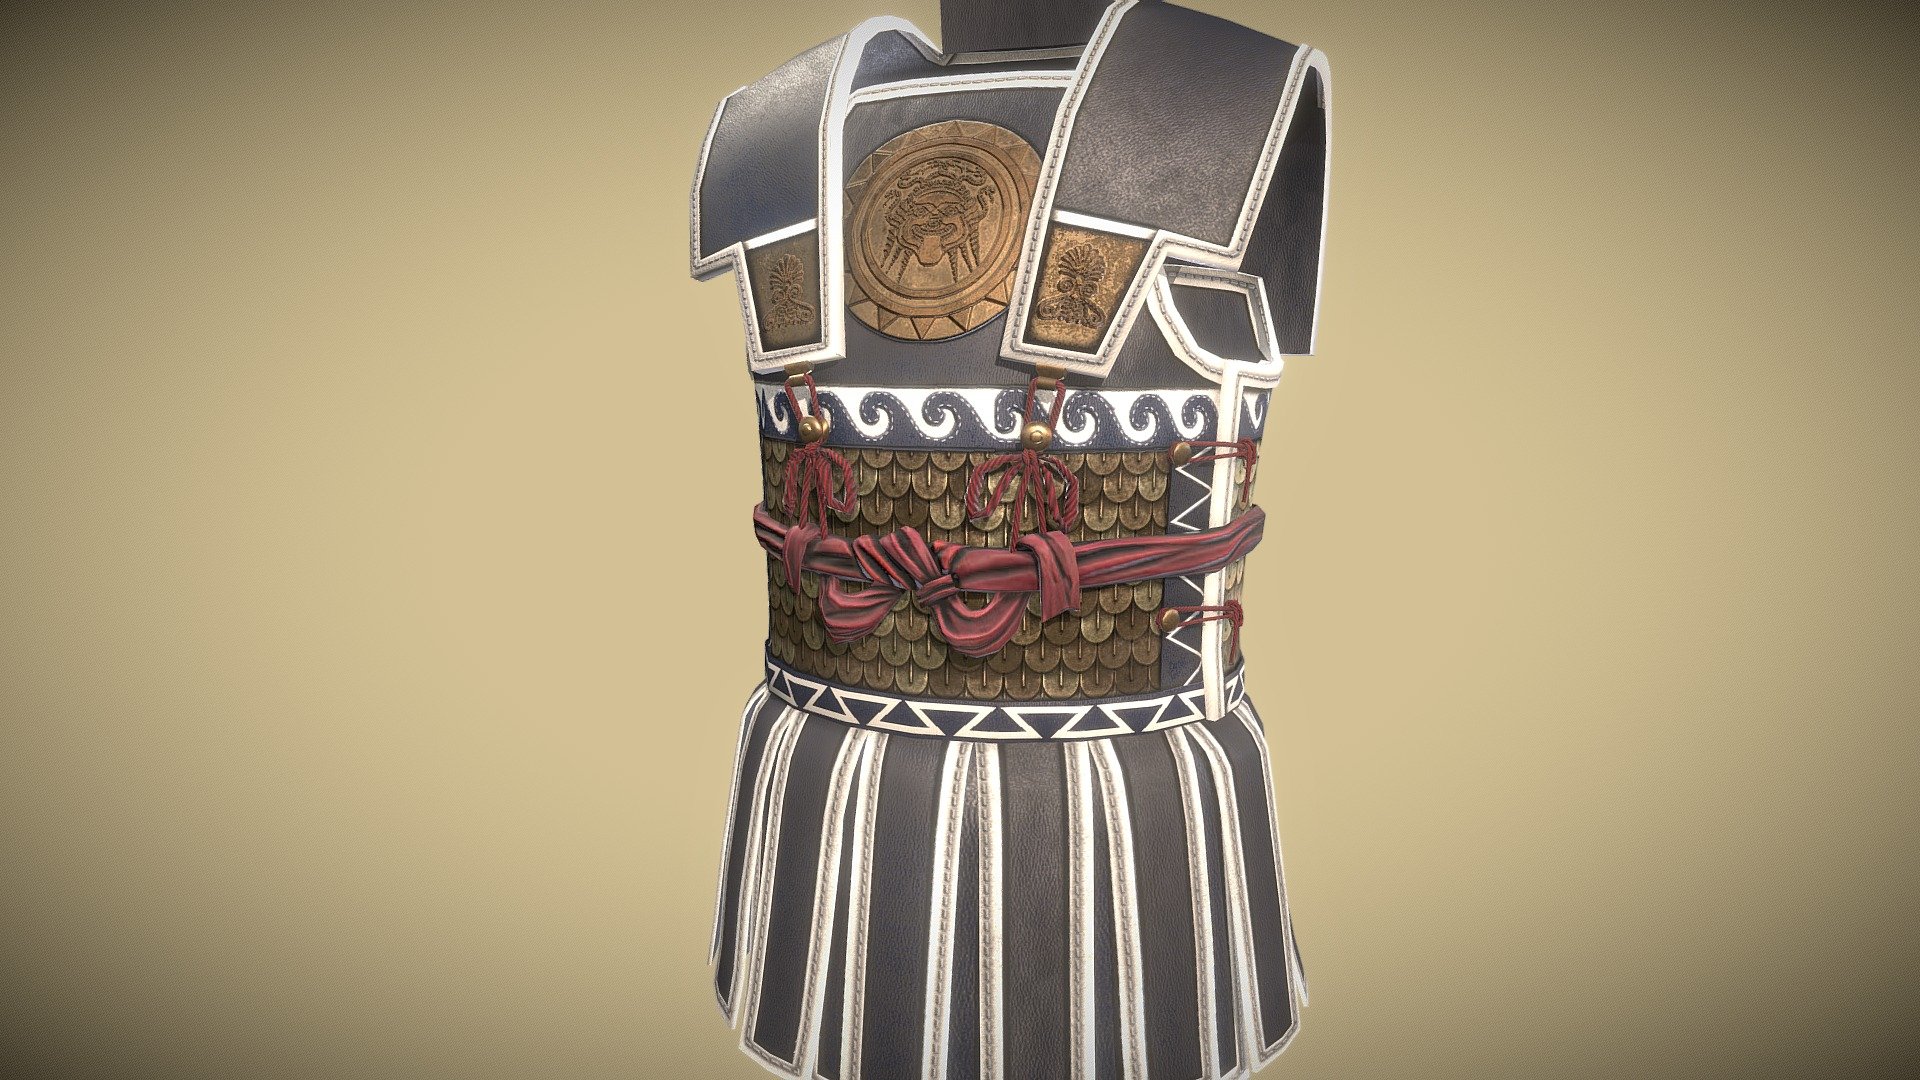 Low Poly reconstruction of the ancient greek armor of linen, or, linothorax. Created for the mod Imperium Surrectum for the game Rome TW: Remastered.

This was the very first project i made while actually understanding how the PBR textures interacts with each other. Speaking of textures, n this particular model were &ldquo;handmade